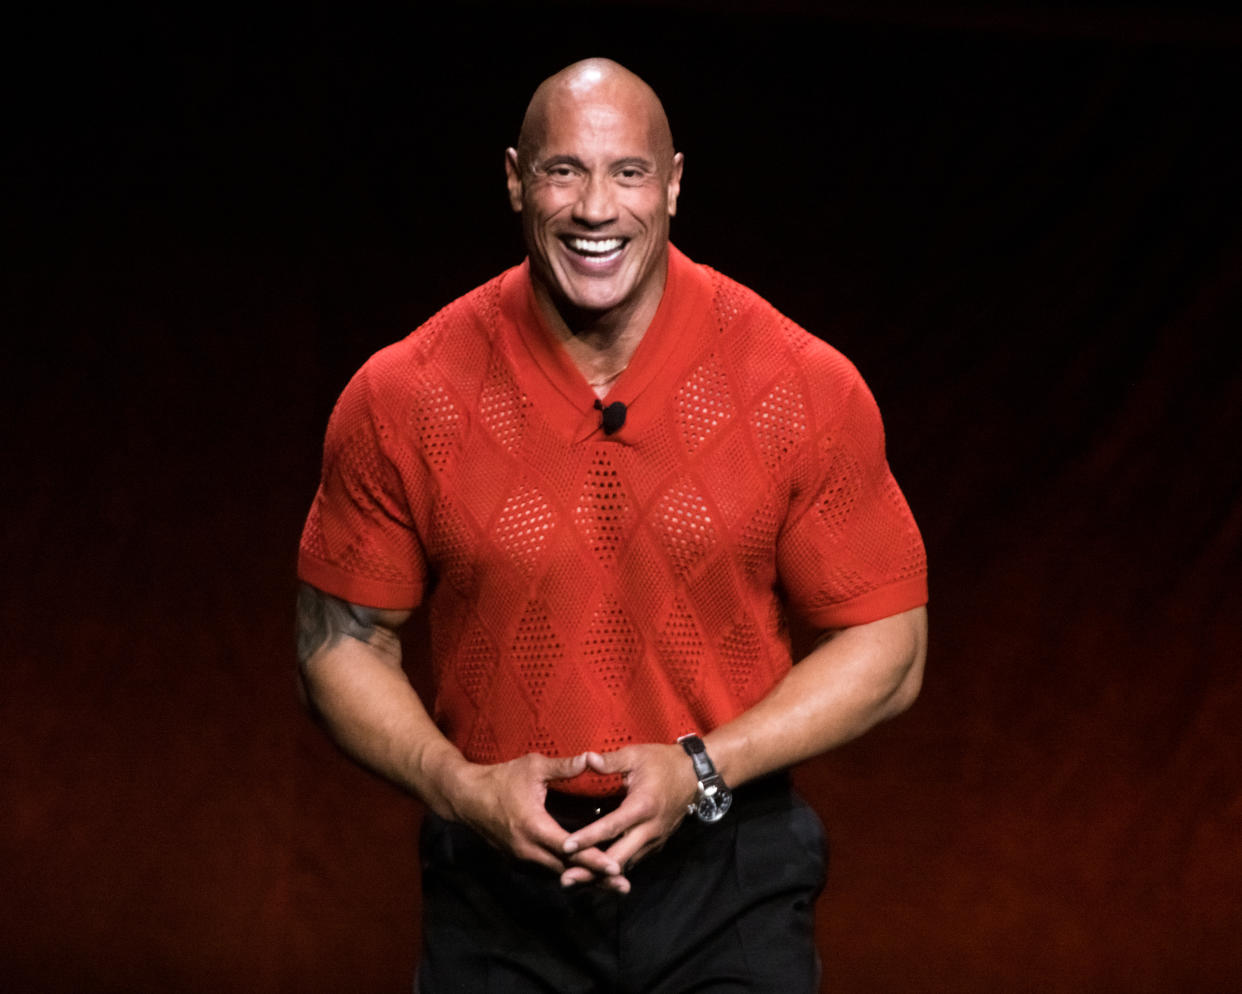 Actor Dwayne Johnson, 50, snapped a photo of himself after his two young daughters drew all over his face while he slept. (Photo: Greg Doherty/Getty Images)